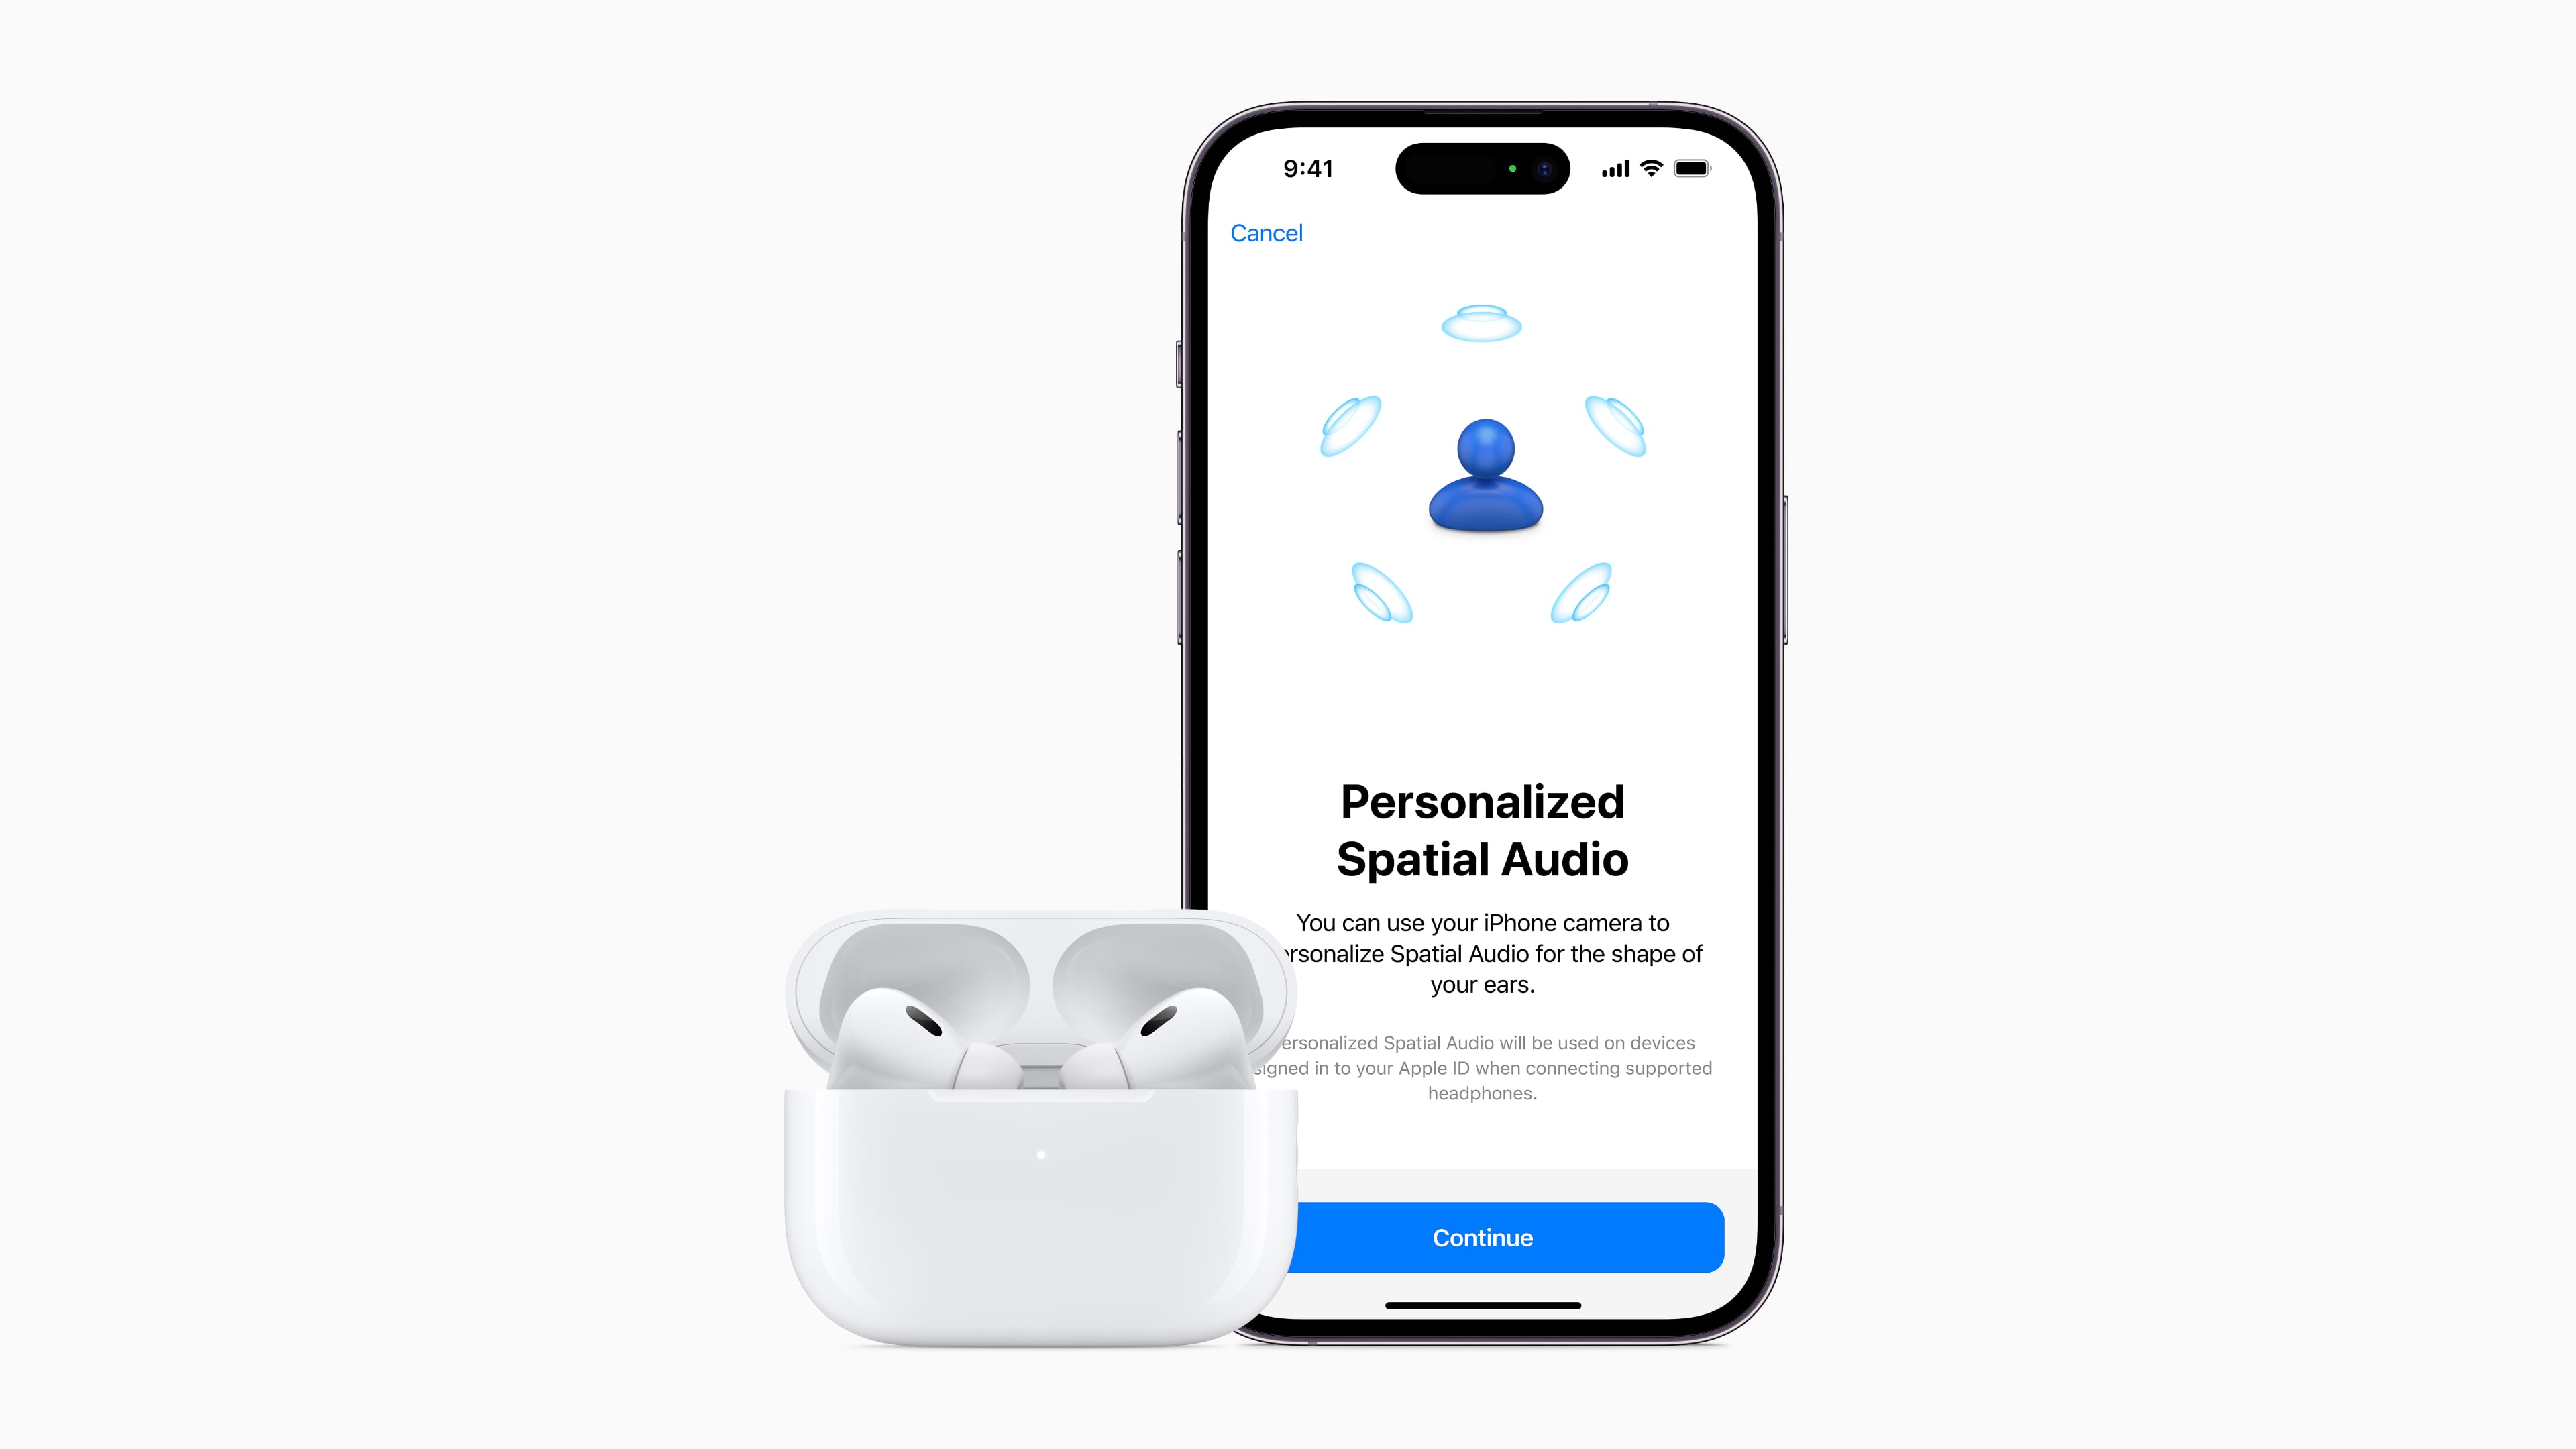 AirPods Pro next to iPhone displaying a splash screen for the personalized spatial audio feature